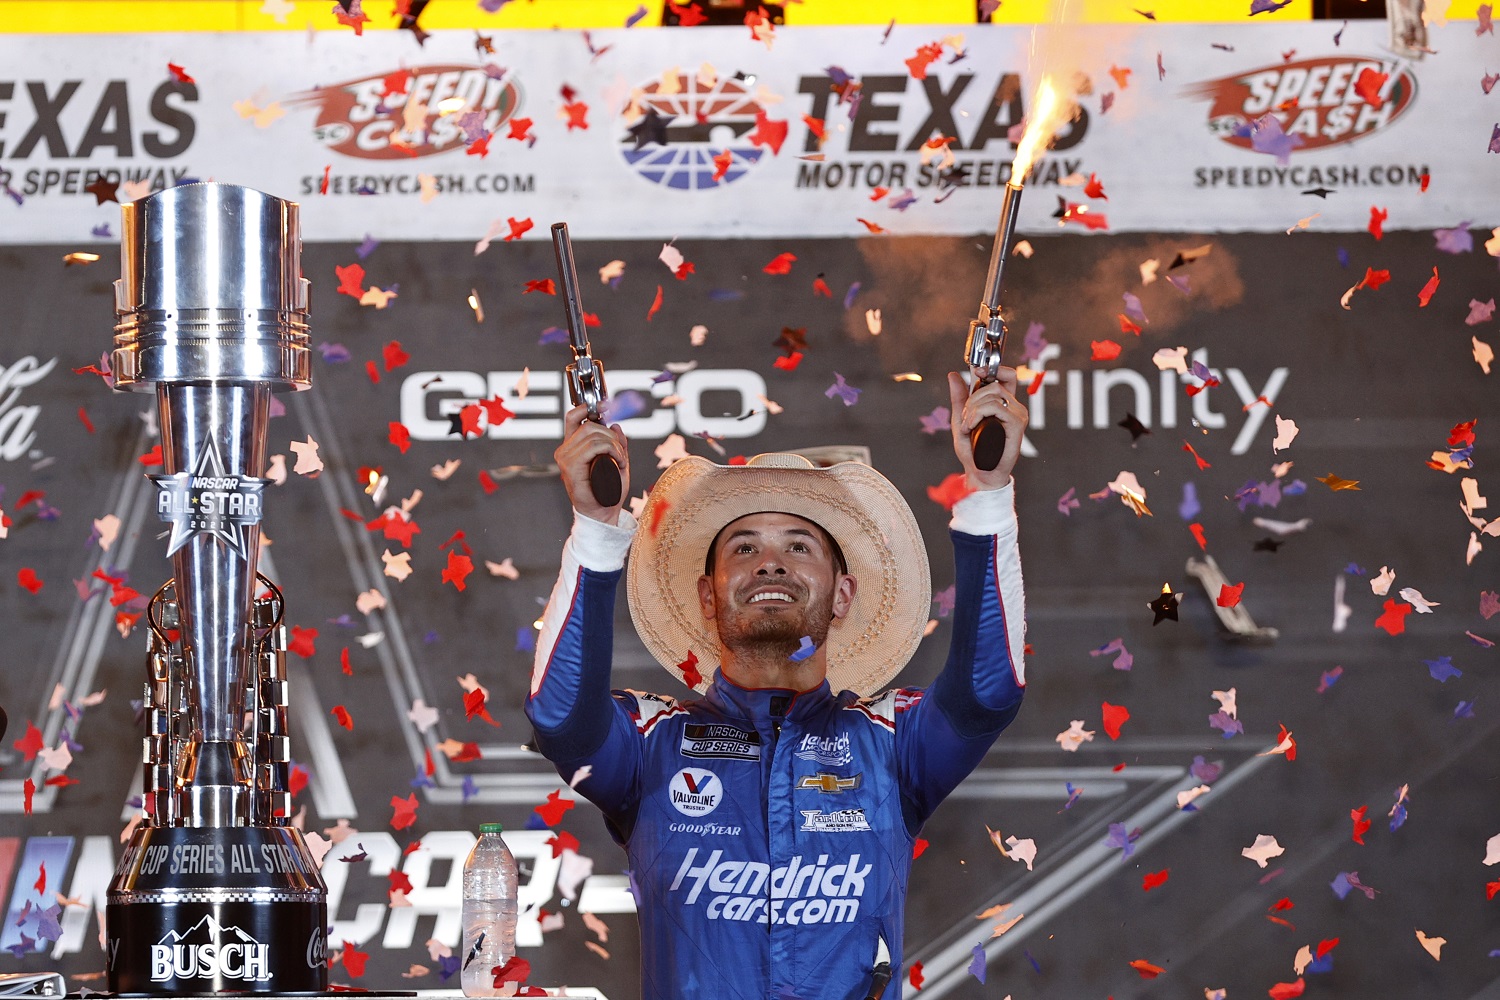 Kyle Larson, driver of the No. 5 Chevrolet, celebrates in victory lane after winning the NASCAR All-Star Race at Texas Motor Speedway on June 13, 2021 in Fort Worth, Texas.